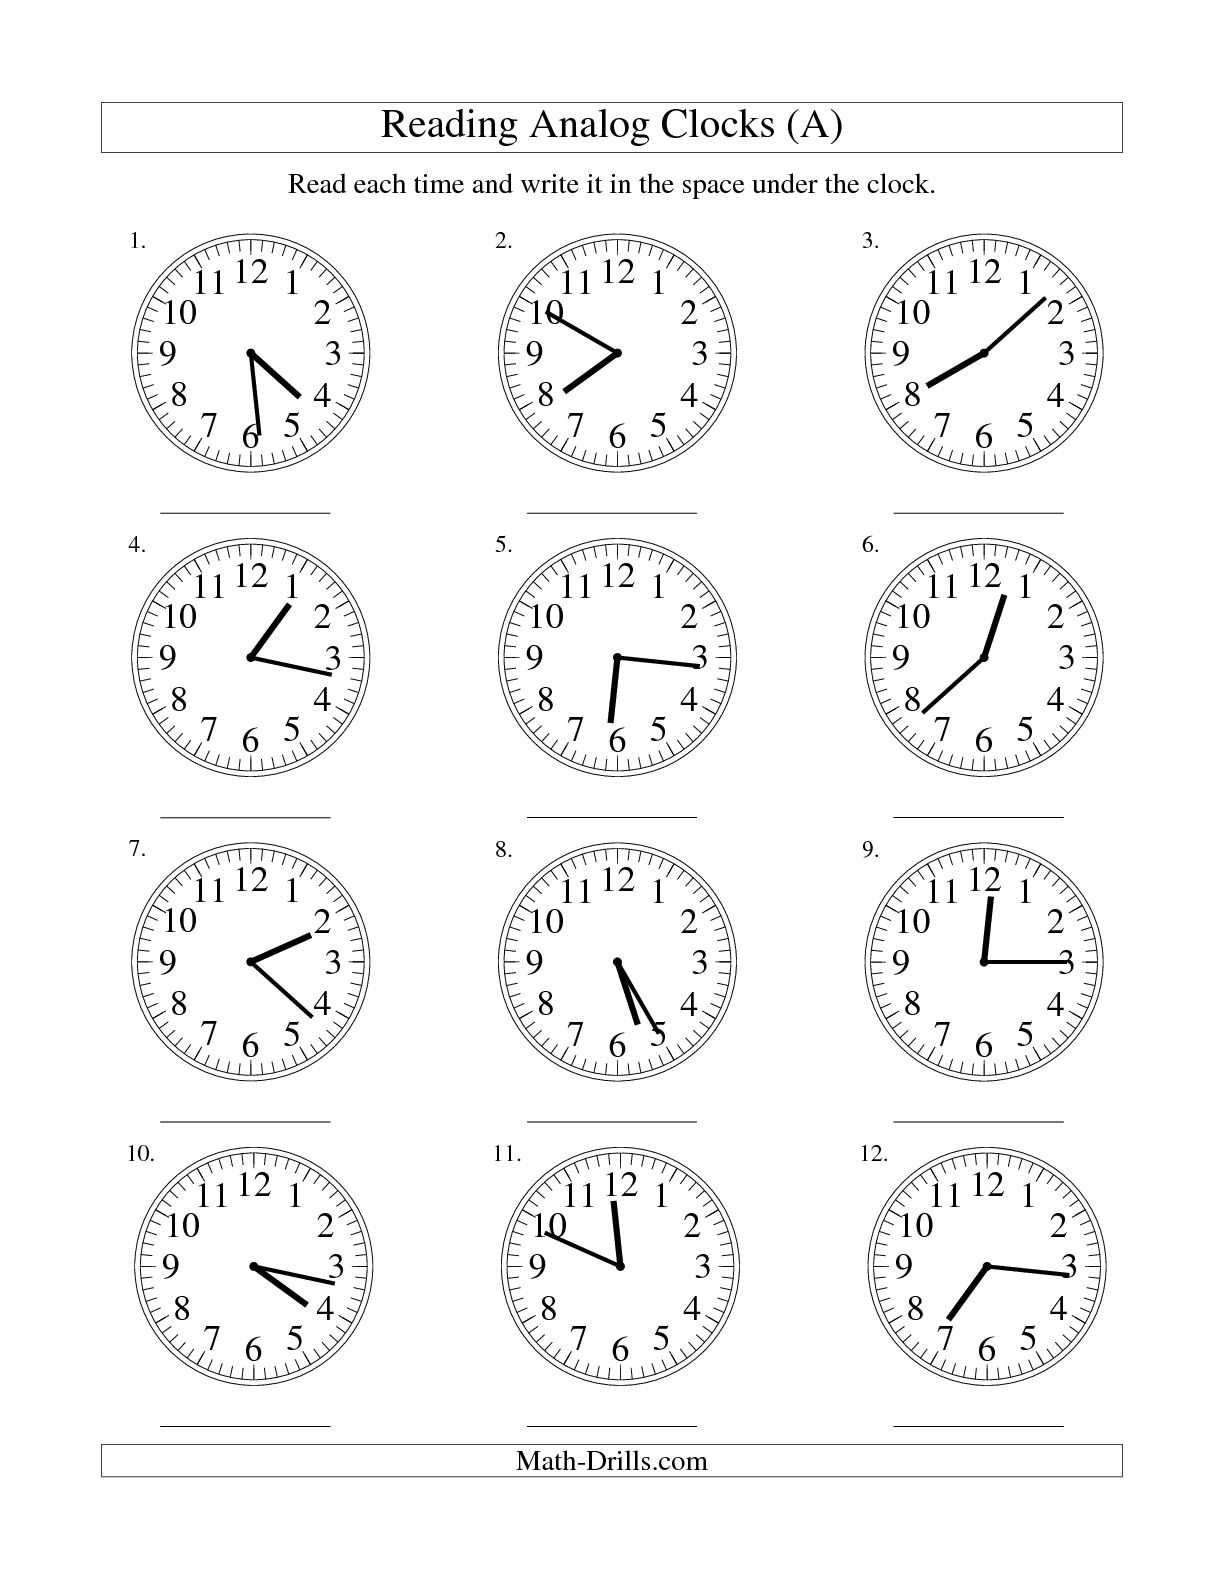 16-best-images-of-worksheet-time-to-15-minutes-reading-analog-clock